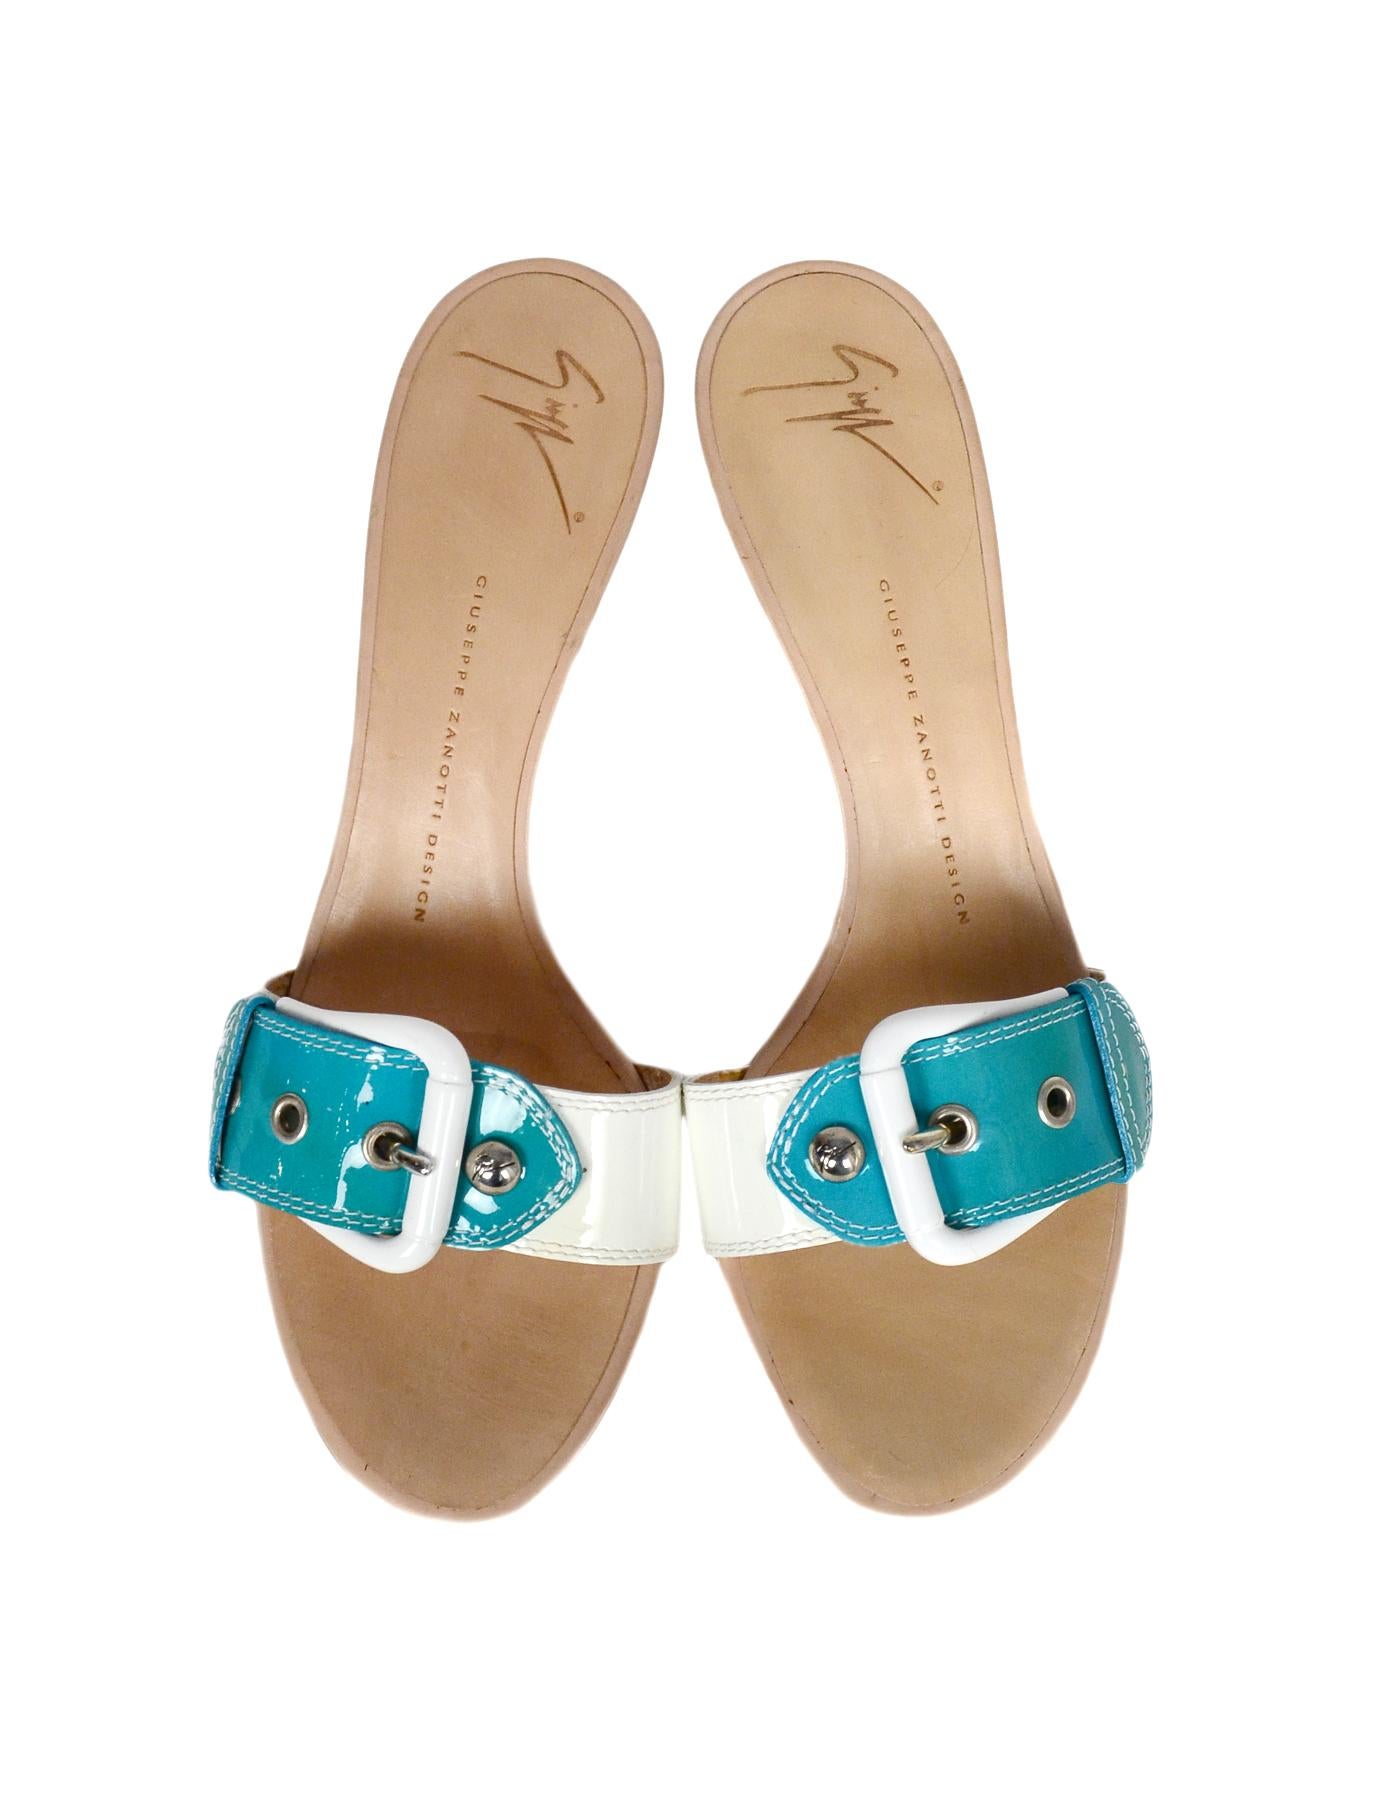 Giuseppe Zanotti White/Turquoise Patent Buckle Mules sz 39 In Excellent Condition For Sale In New York, NY